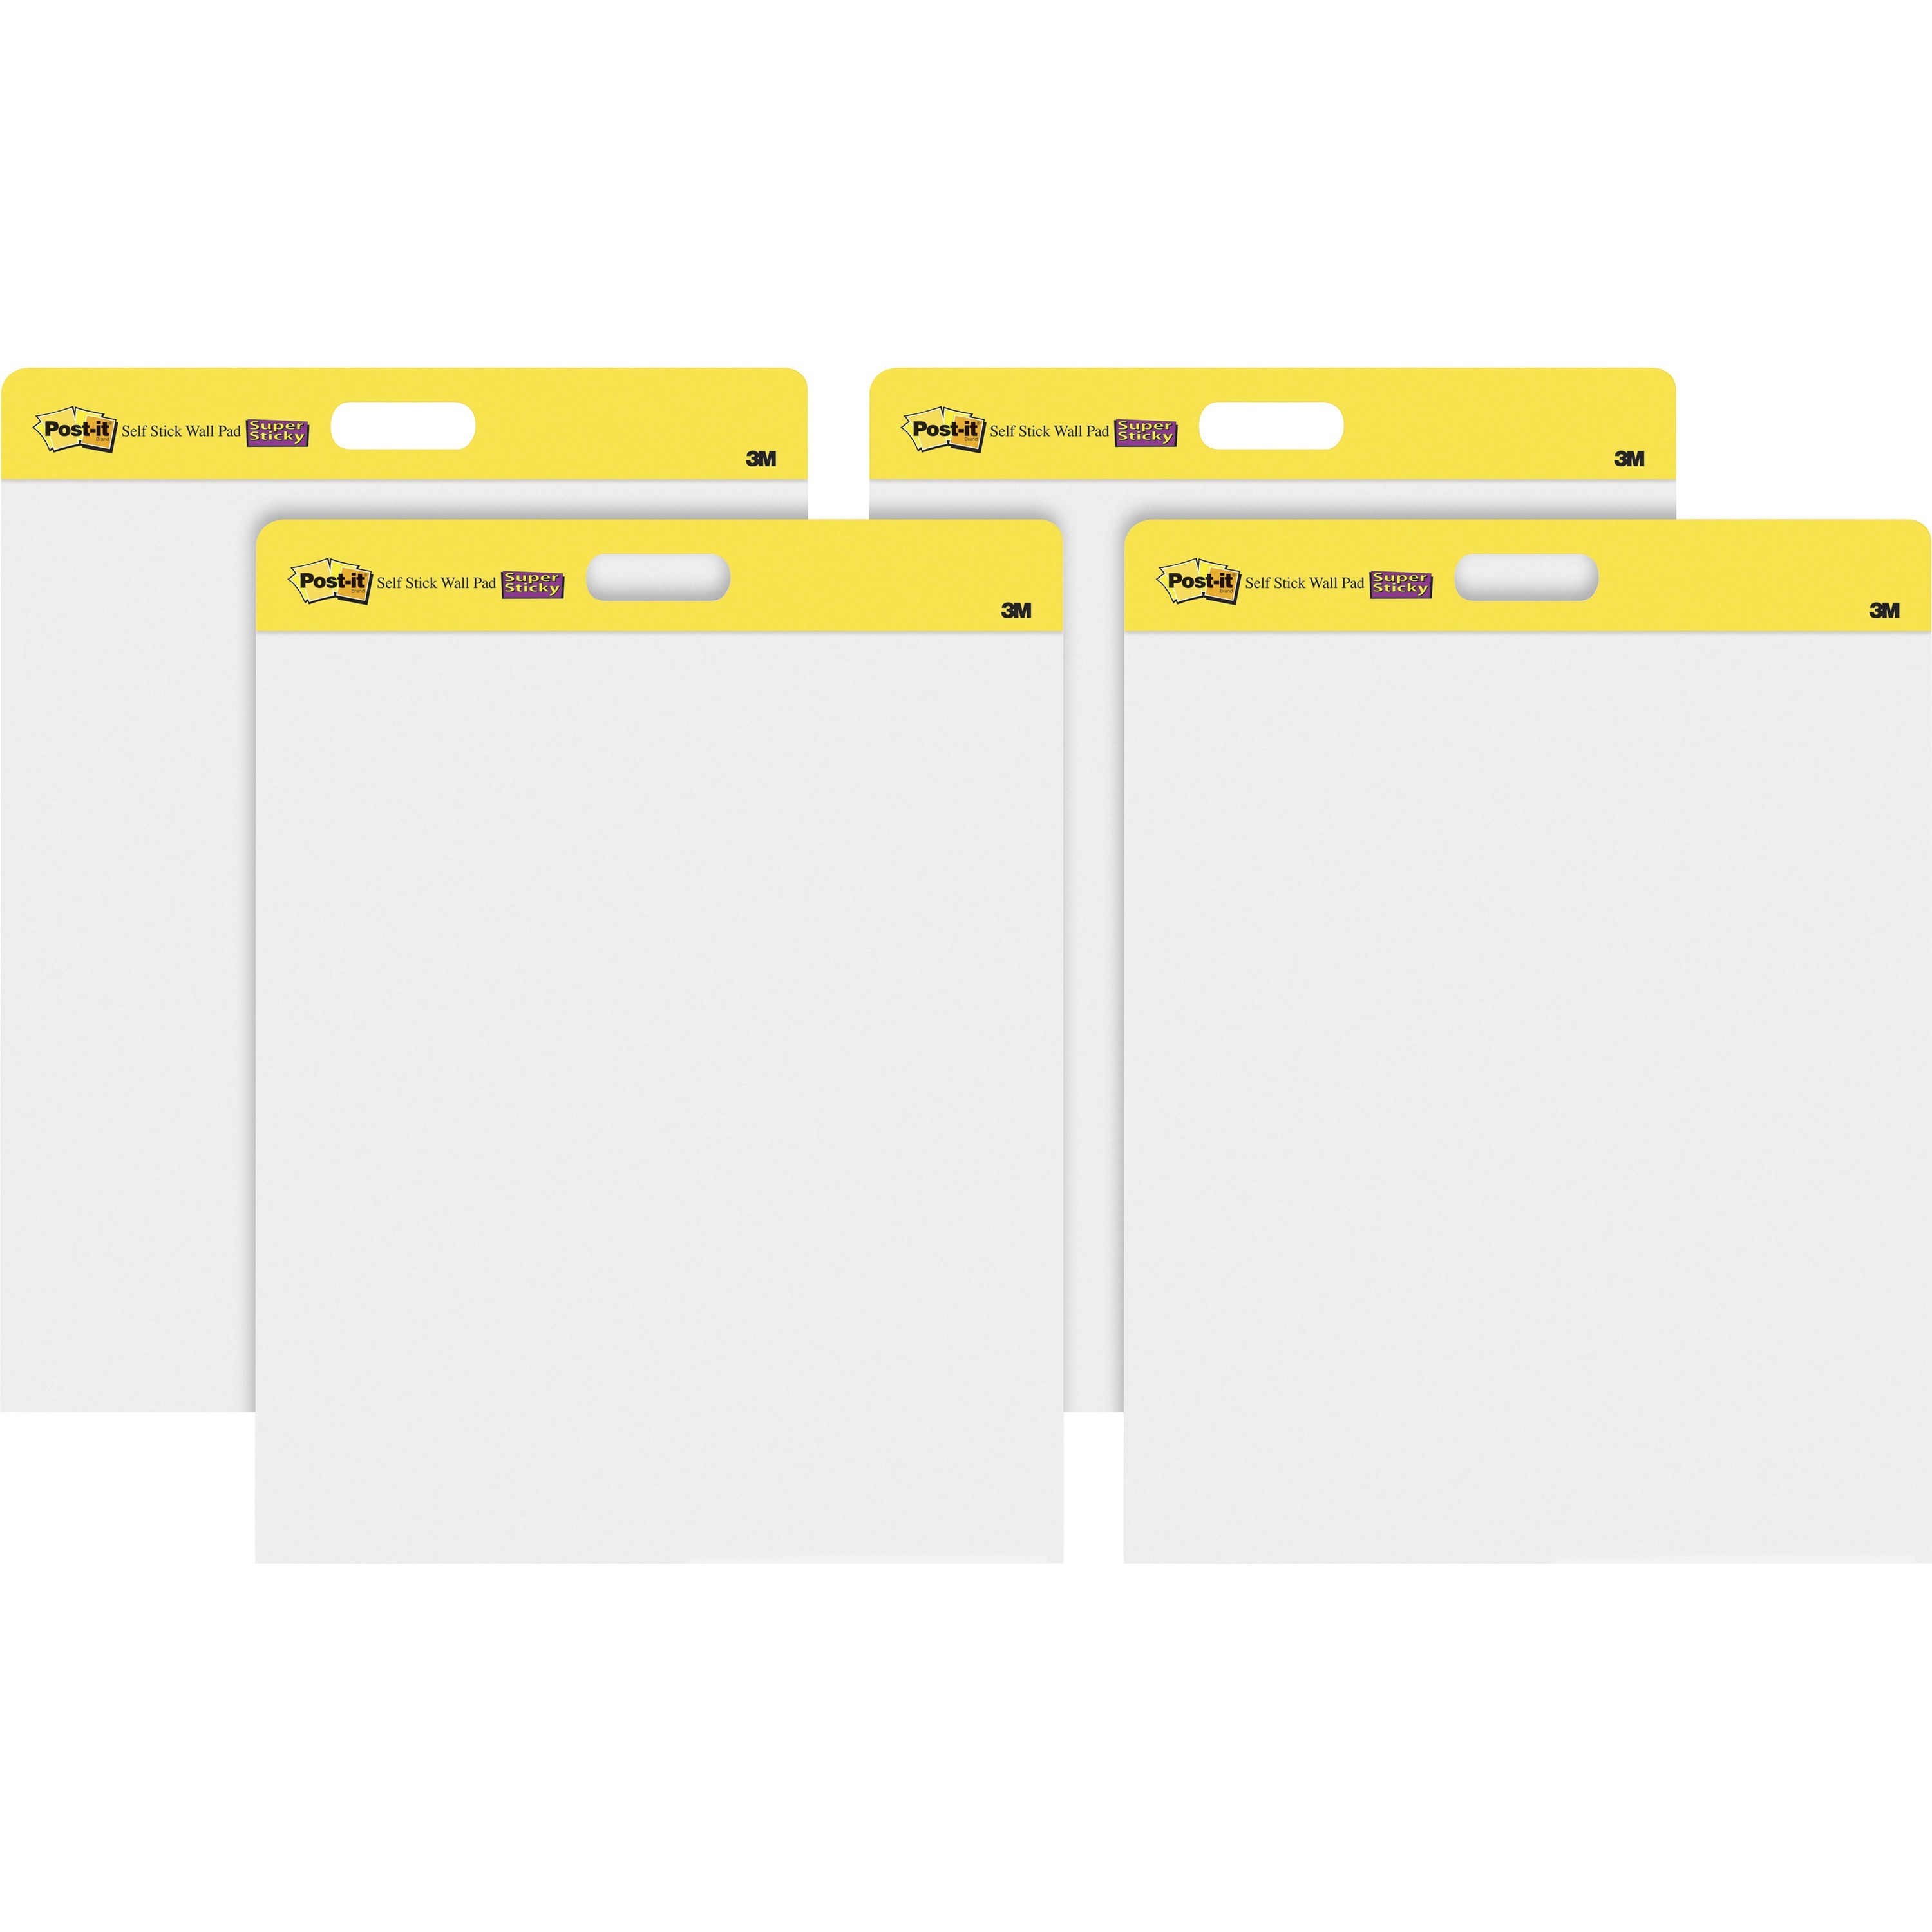 Post-it® Self-Stick Easel Pads - 20 Sheets - Plain - Stapled